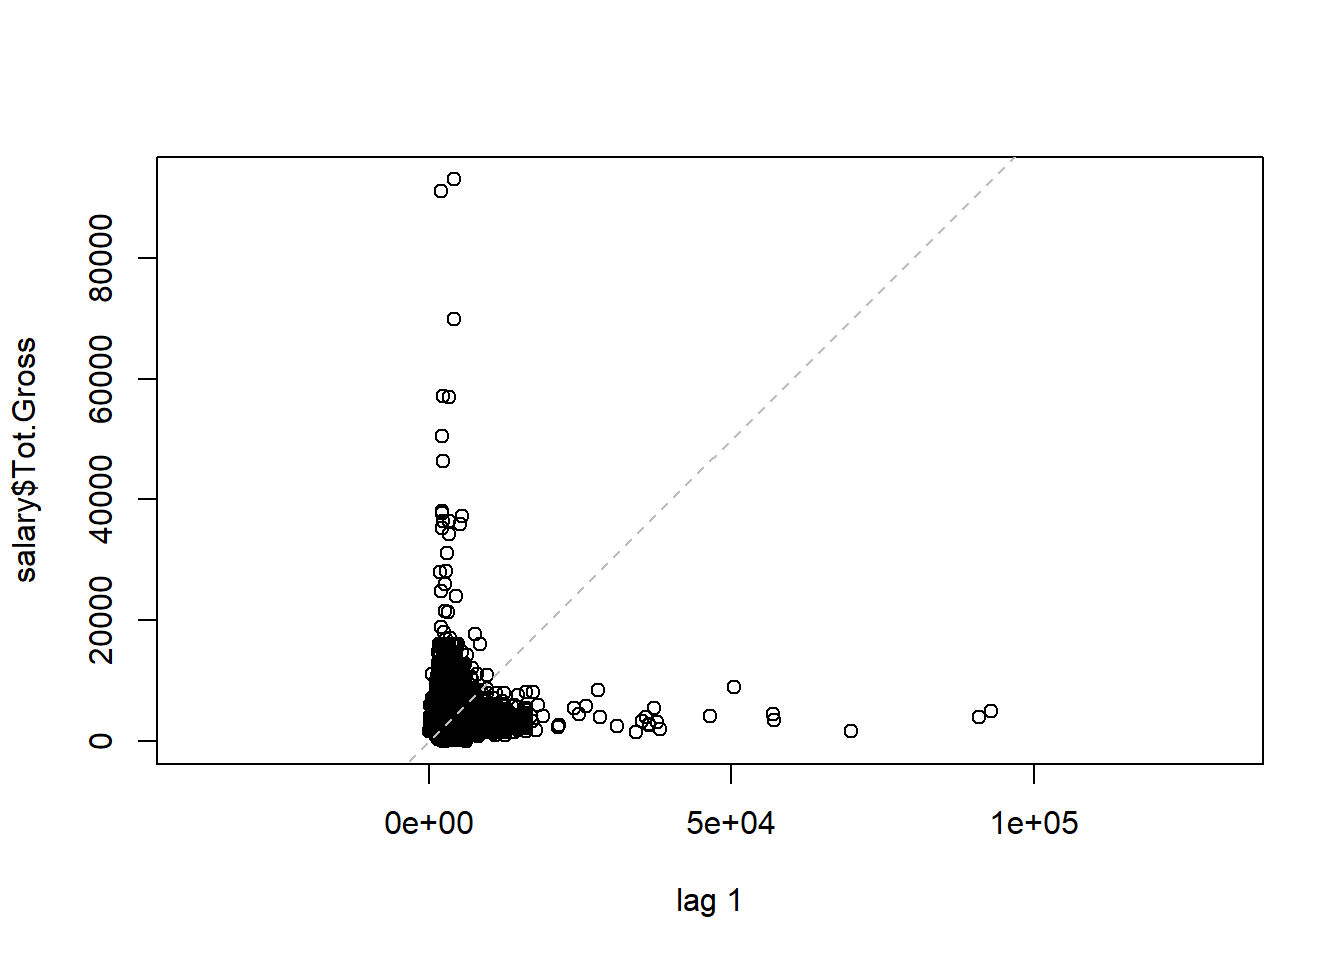 Scatterplot and lagplot of total gross income.